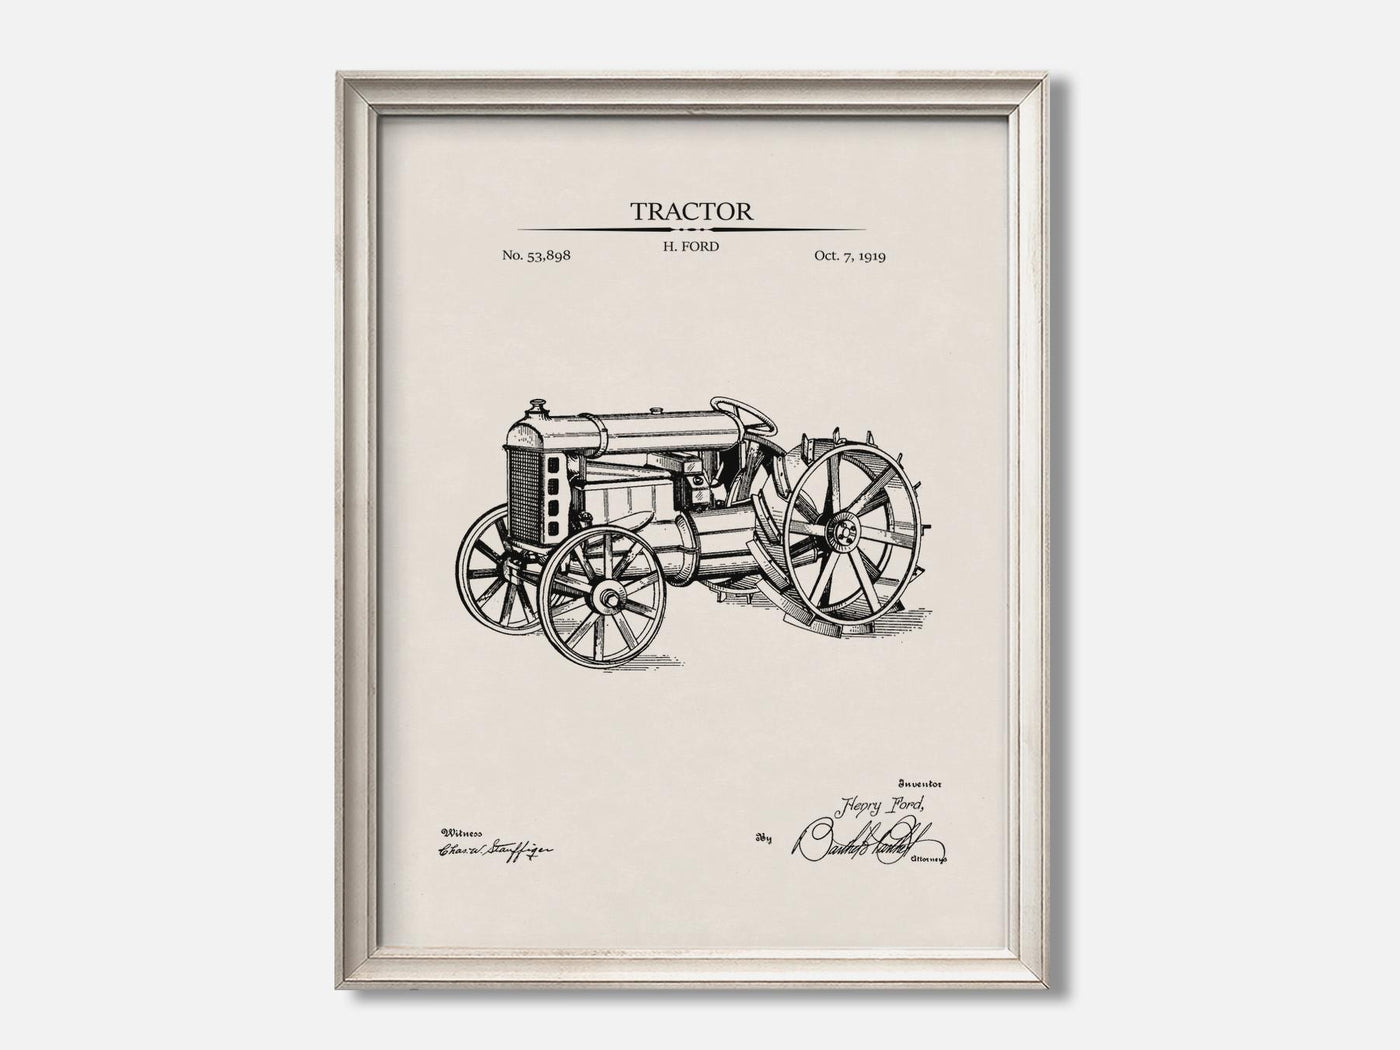 Tractor Patent Print mockup - A_t10025.3-V1-PC_F+O-SS_1-PS_5x7-C_ivo variant